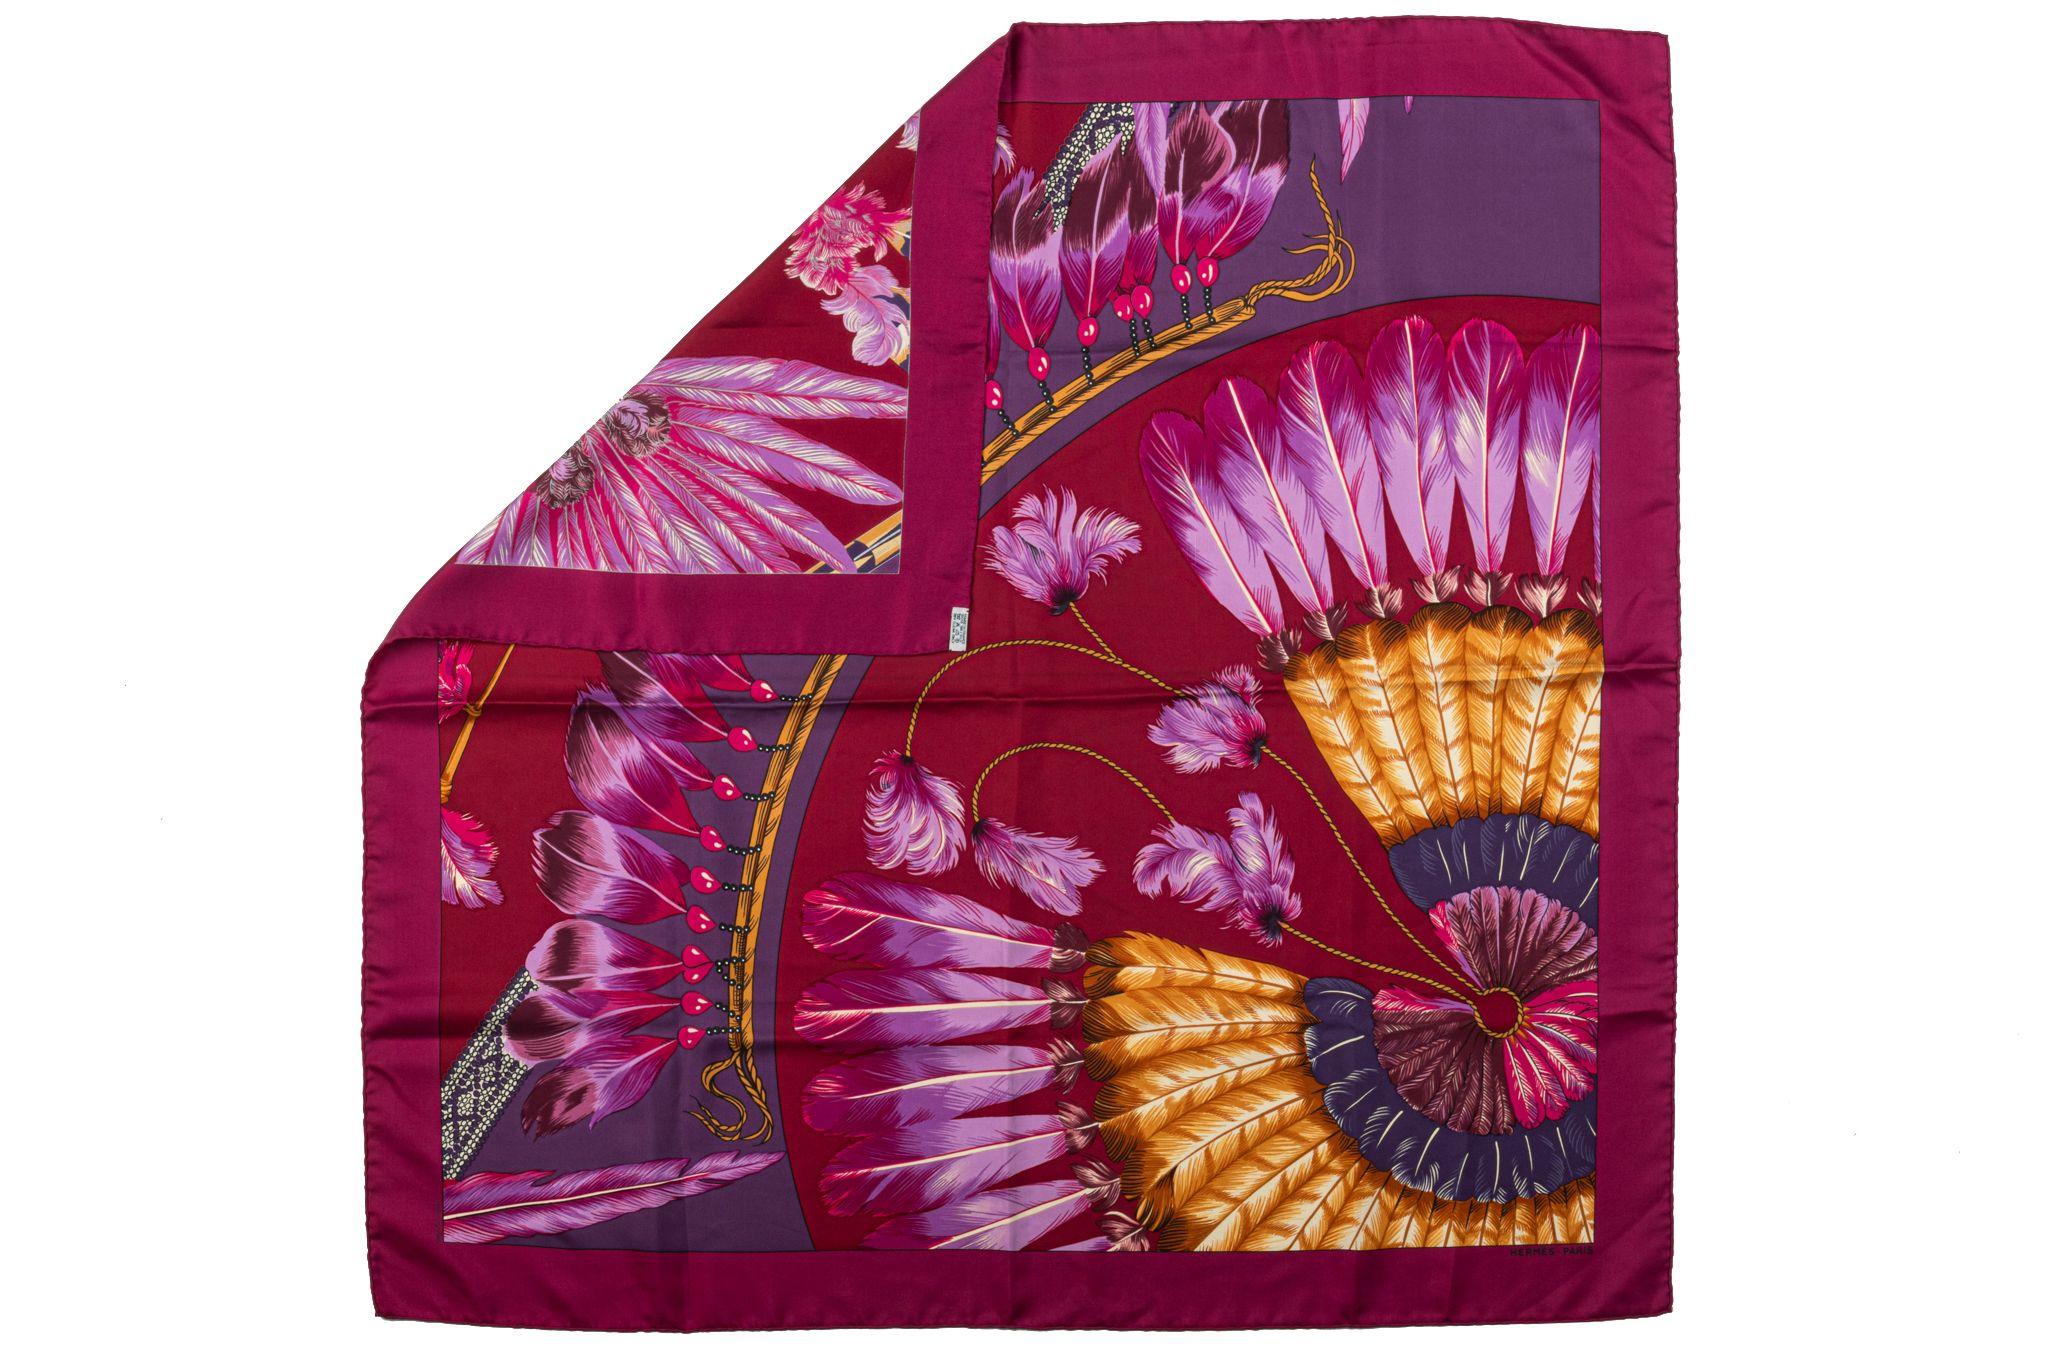 Hermes collectible Brazil design in muticolor purple, burgundy silk scarf. Hand rolled edges.